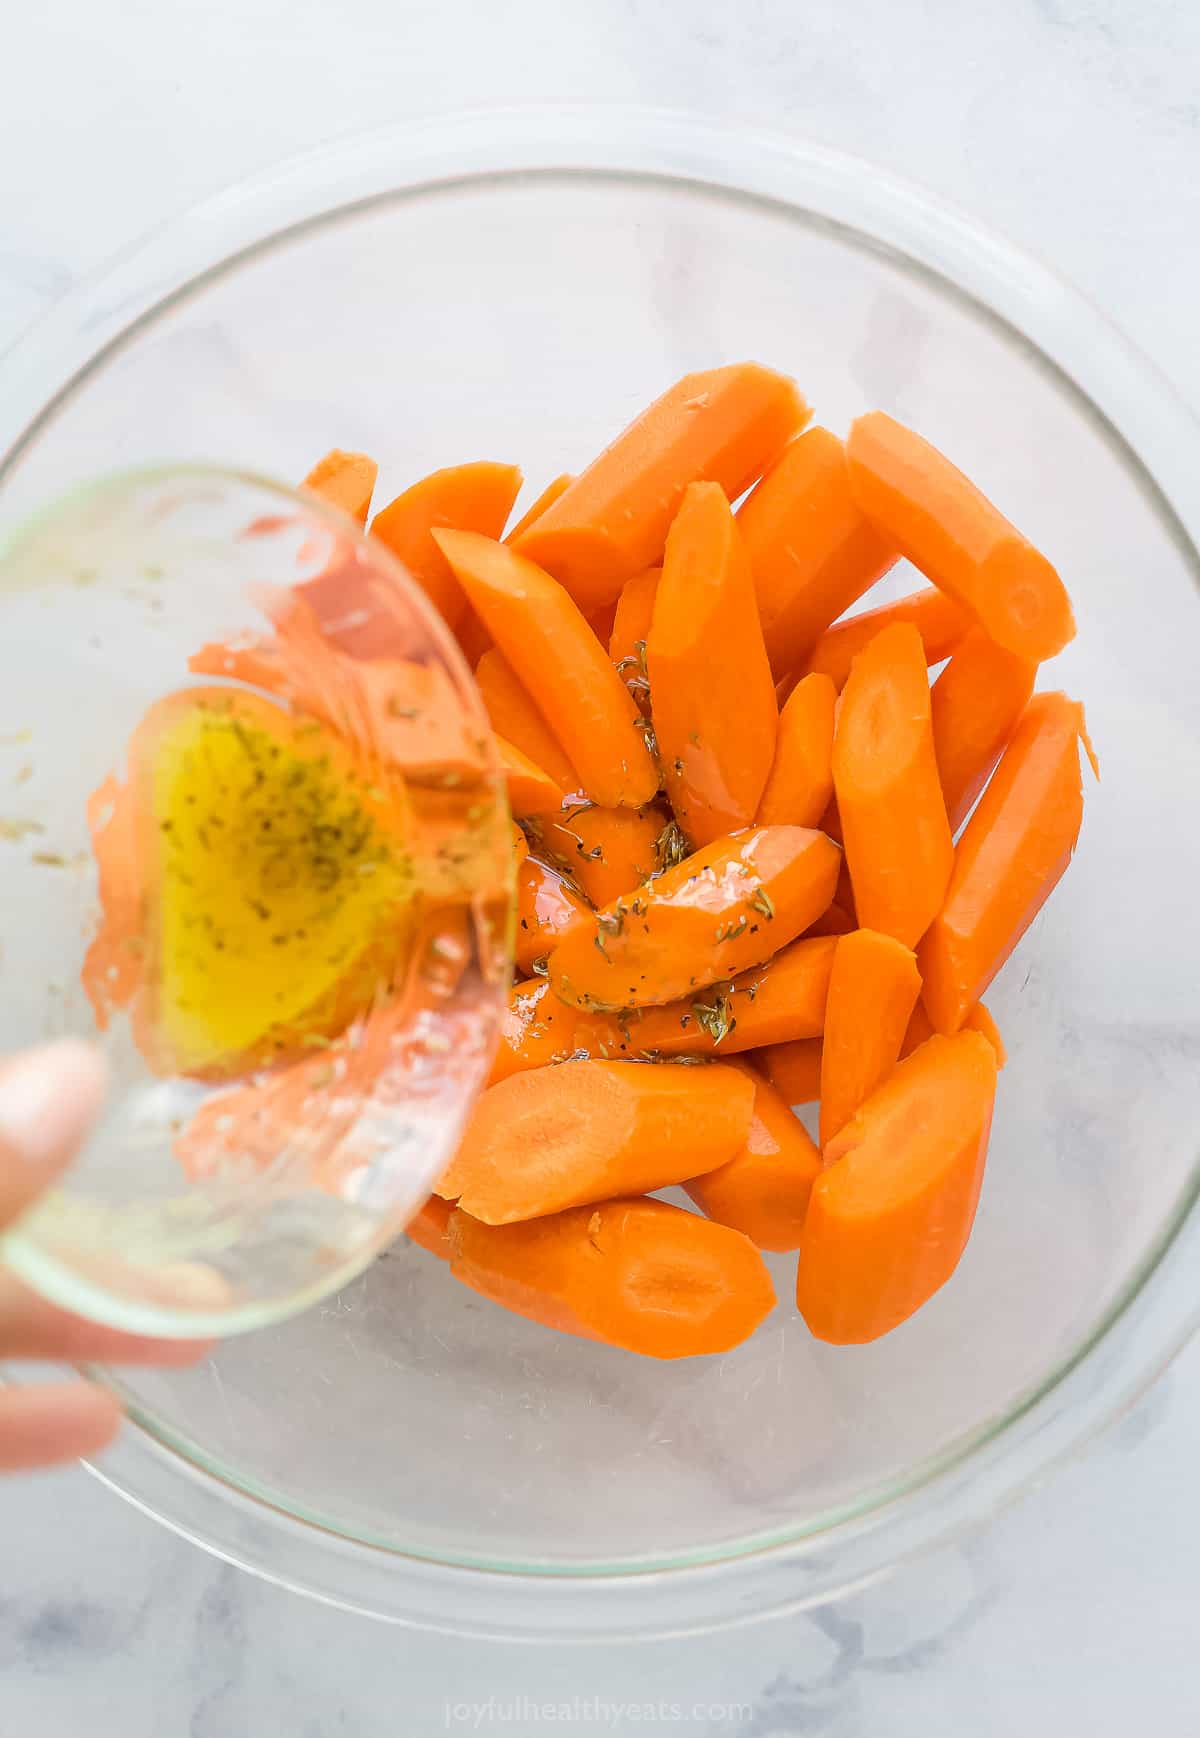 pouring seasoned olive oil over a bowl of cut up carrots